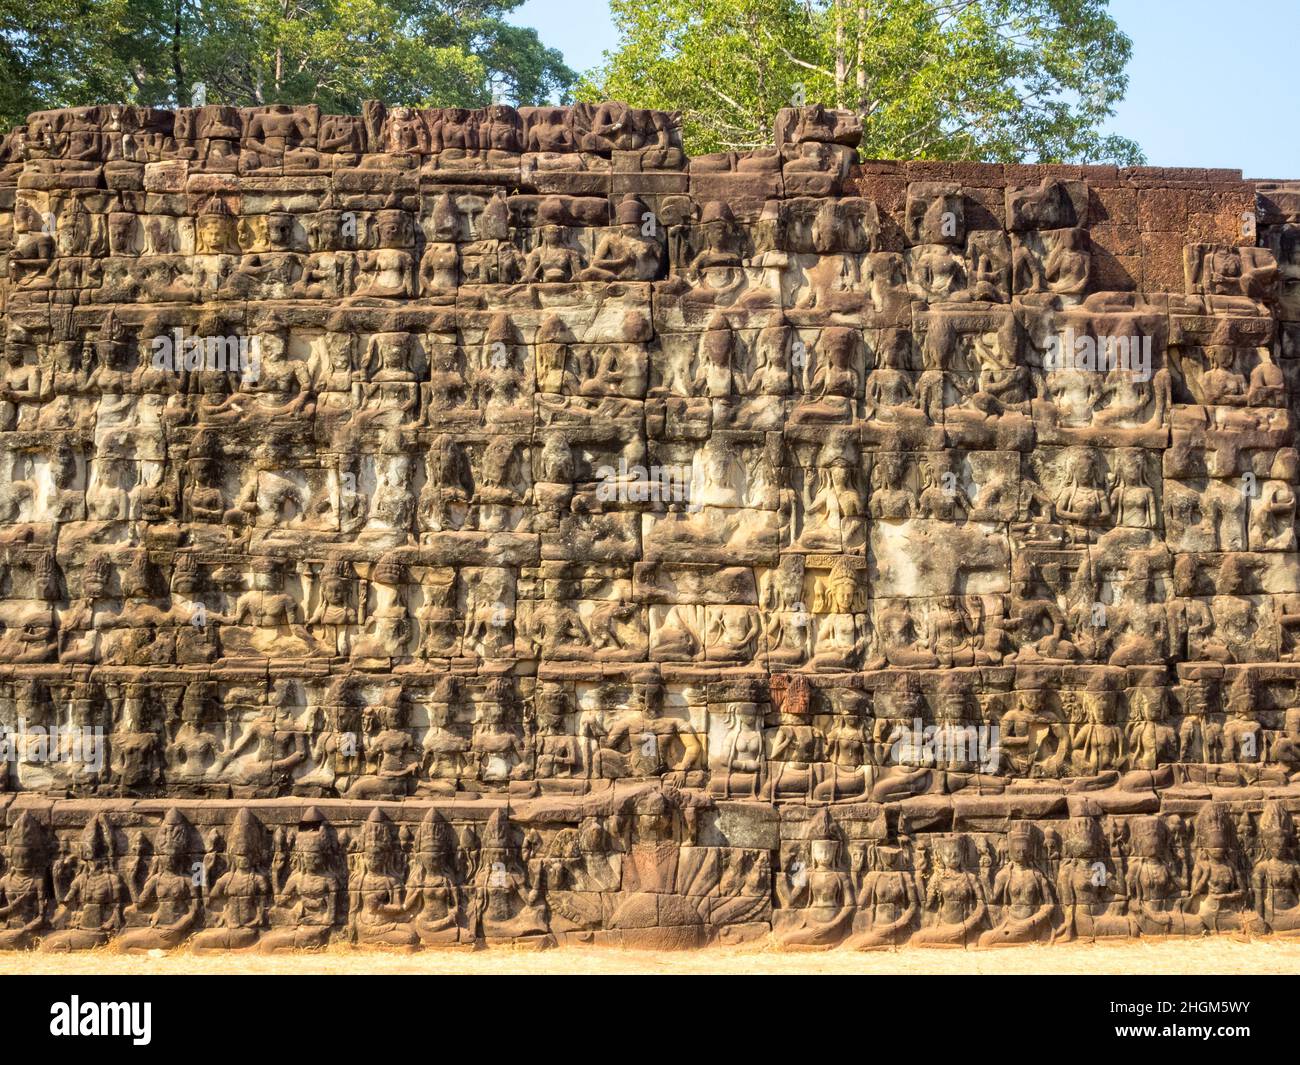 The Terrace of the Leper King is a terrace wall with deeply carved nagas, demons and other mythological figures at Angkor Thom, Siem Reap, Cambodia Stock Photo